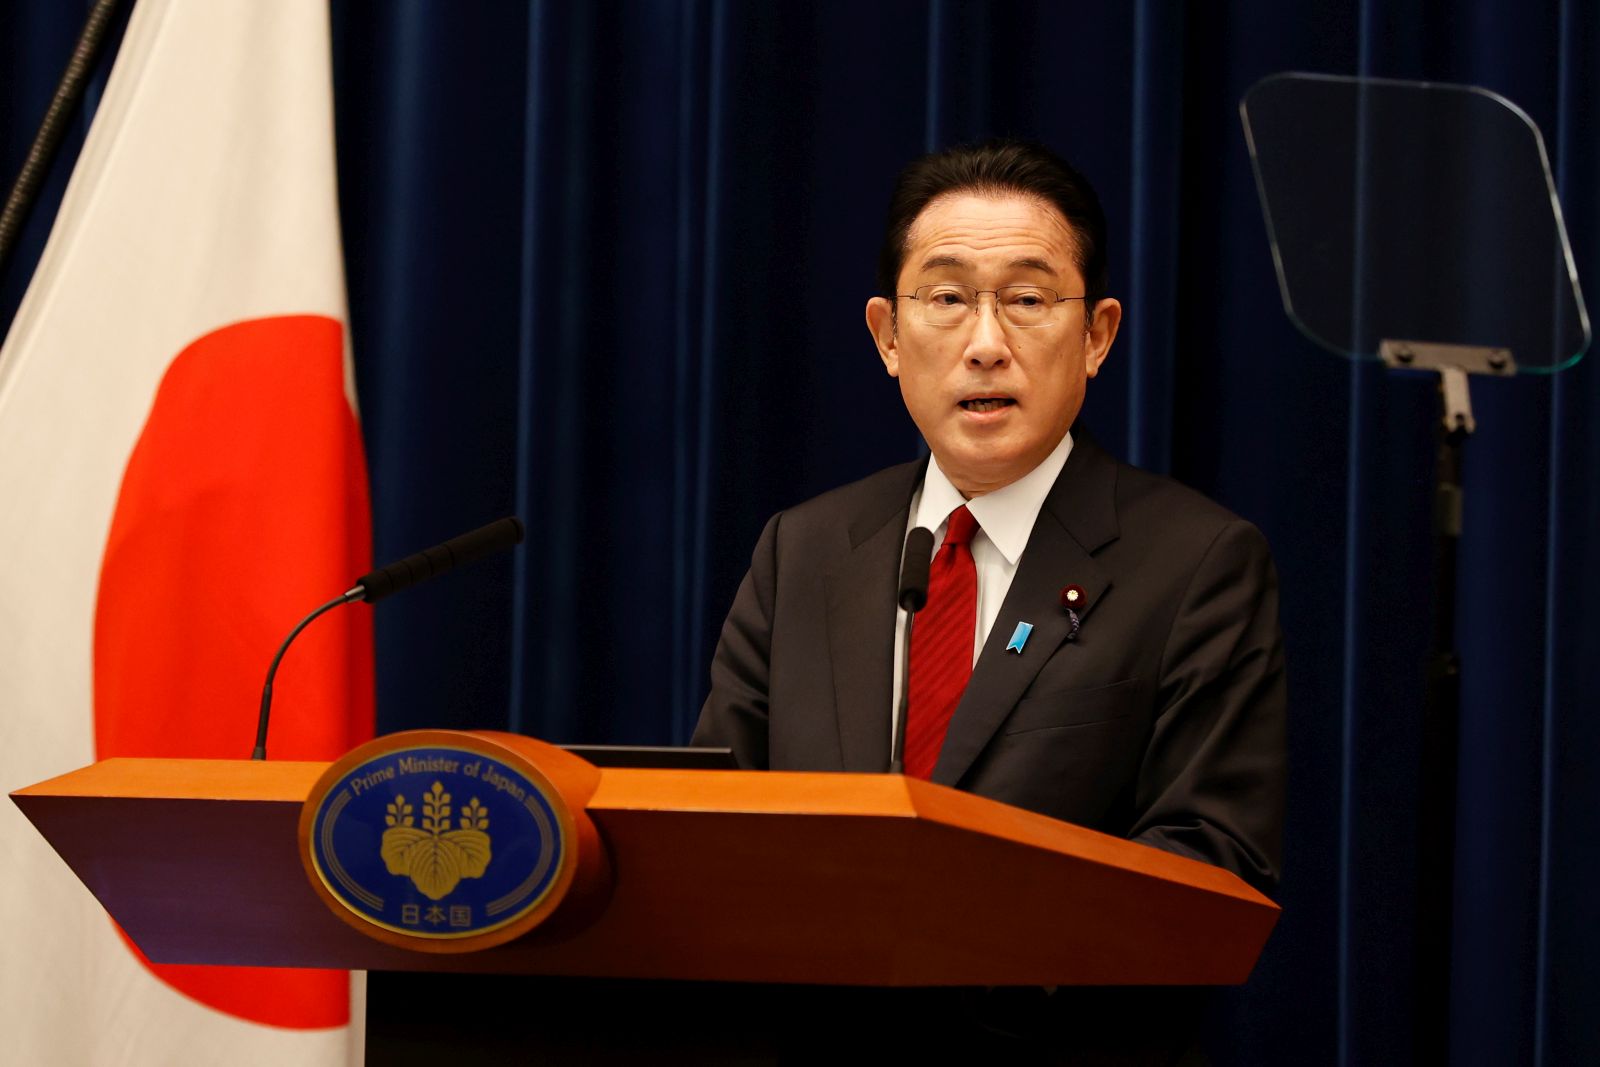 epa09782770 Japan's Prime Minister Fumio Kishida speaks during a press conference at the prime minister's official residence in Tokyo, Japan, 25 February 2022.  EPA/Rodrigo Reyes Marin / POOL